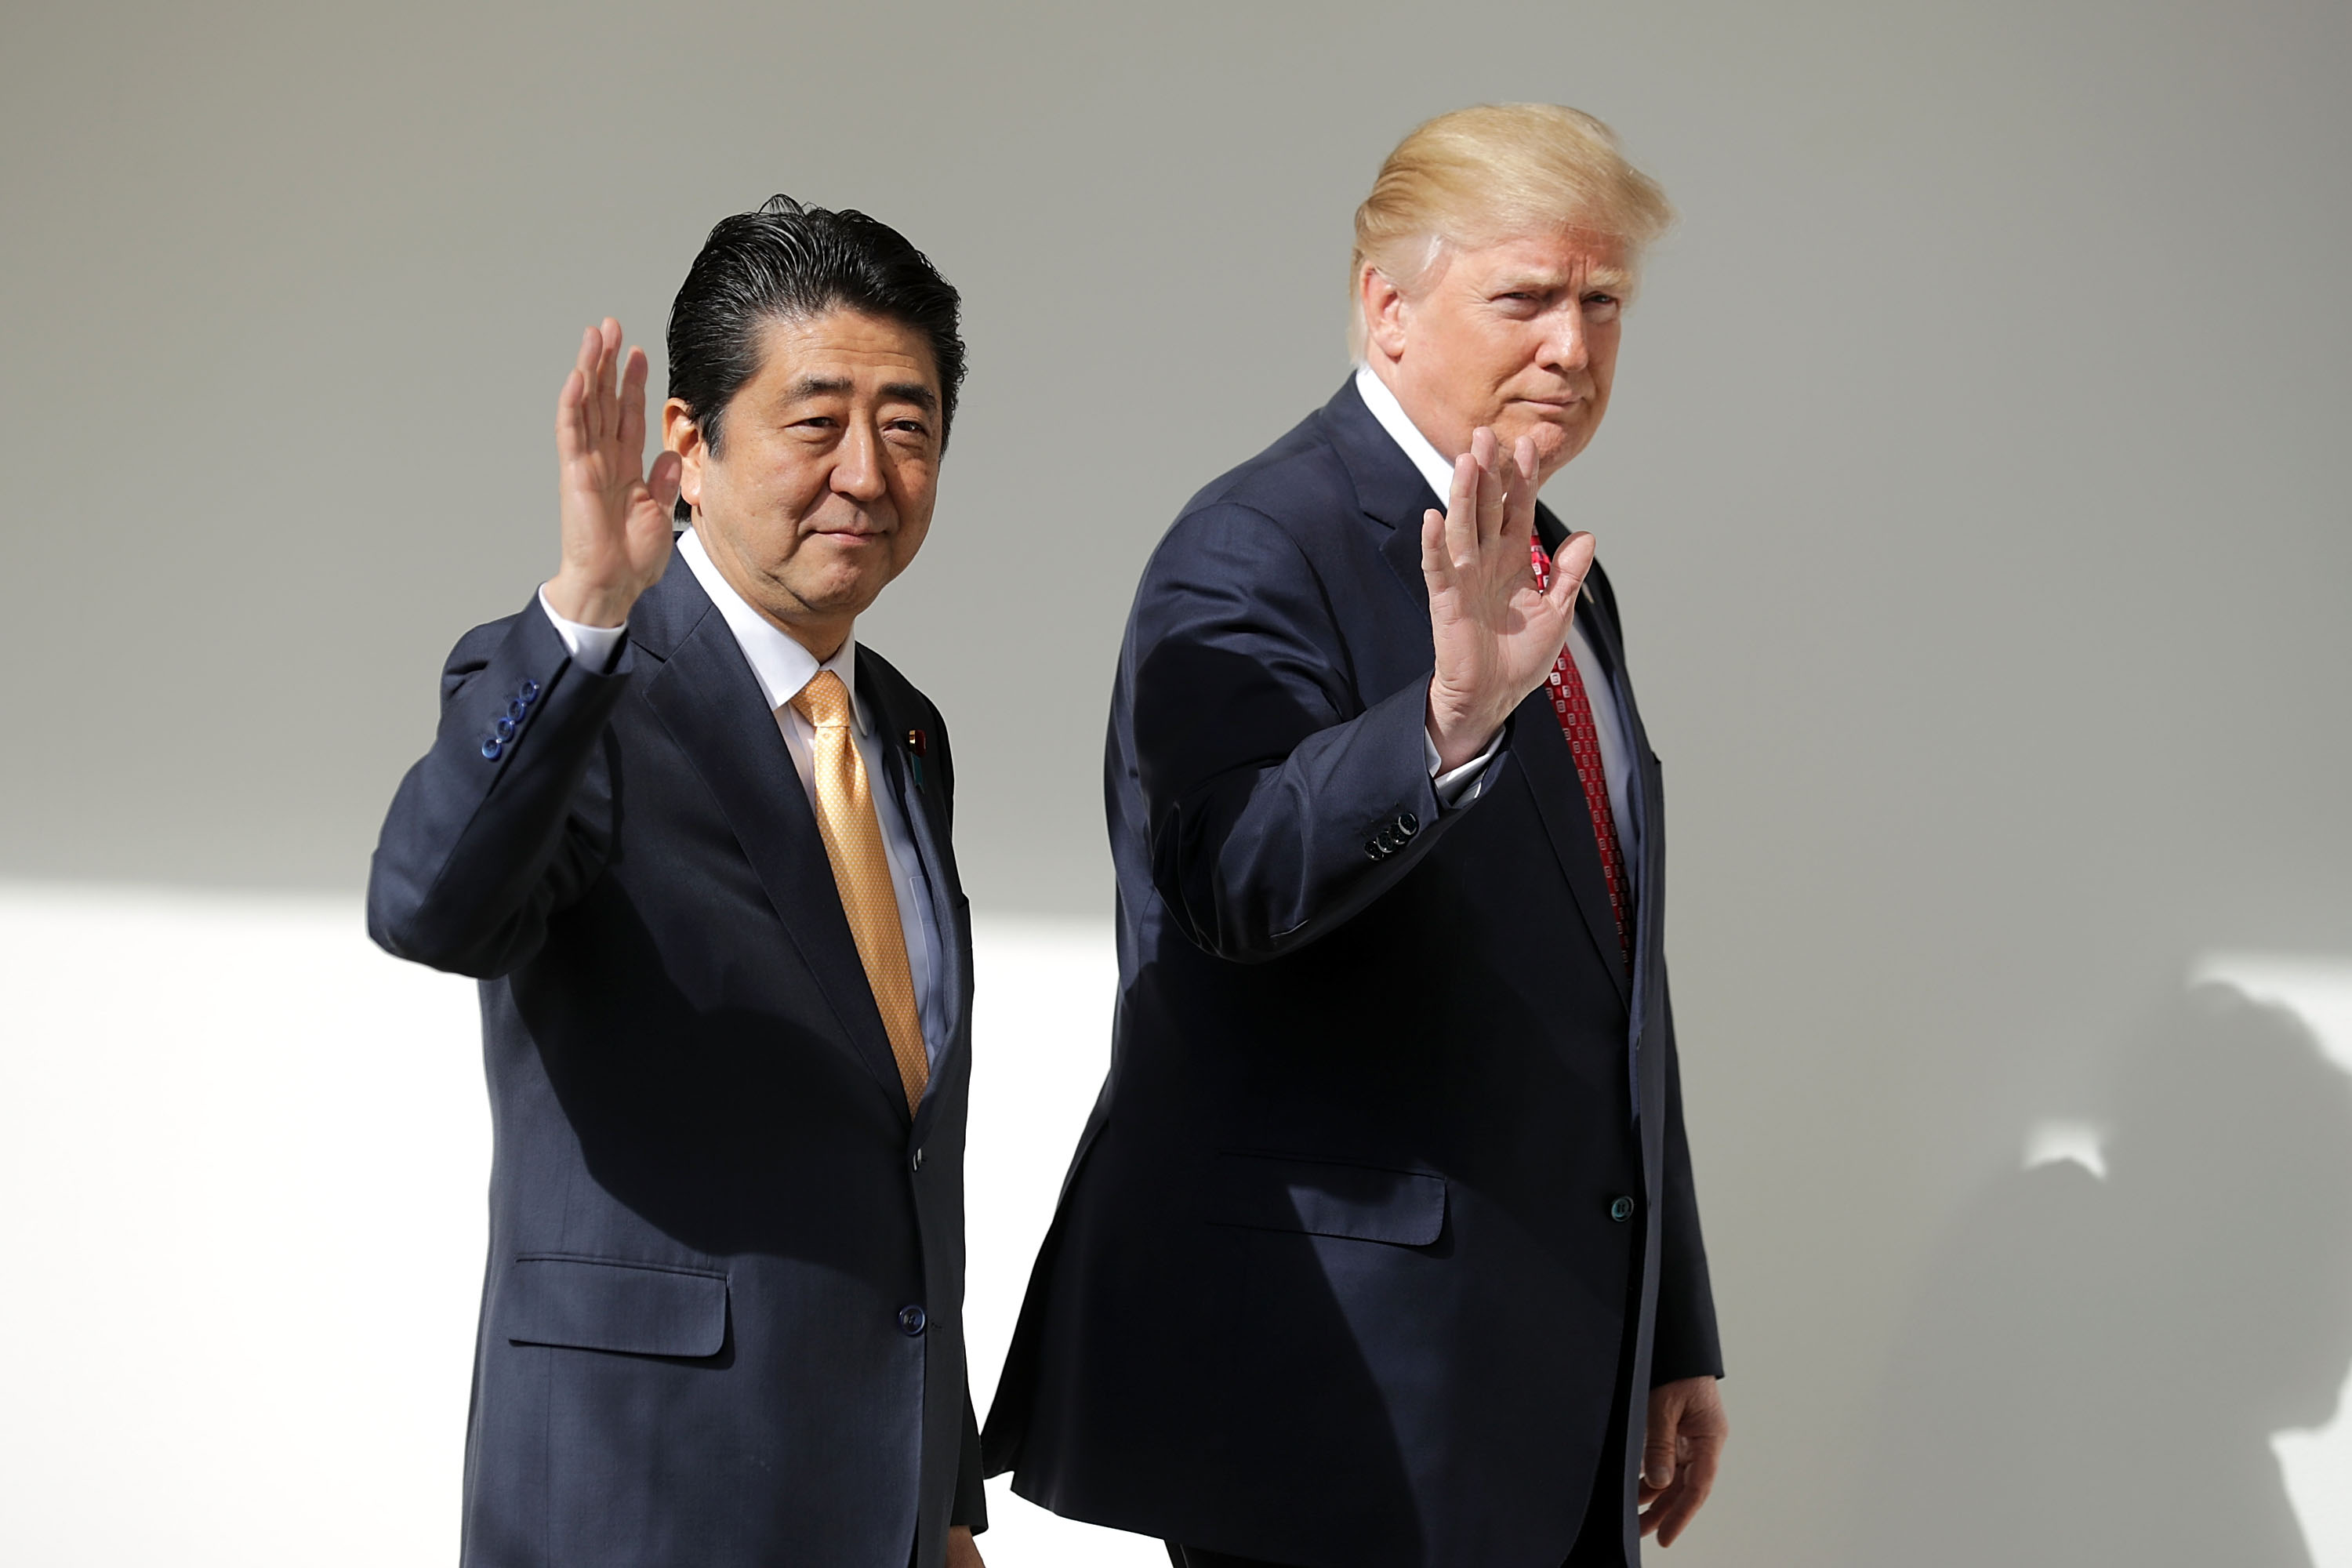 President Trump Holds Joint Press Conference With Japanese PM Shinzo Abe